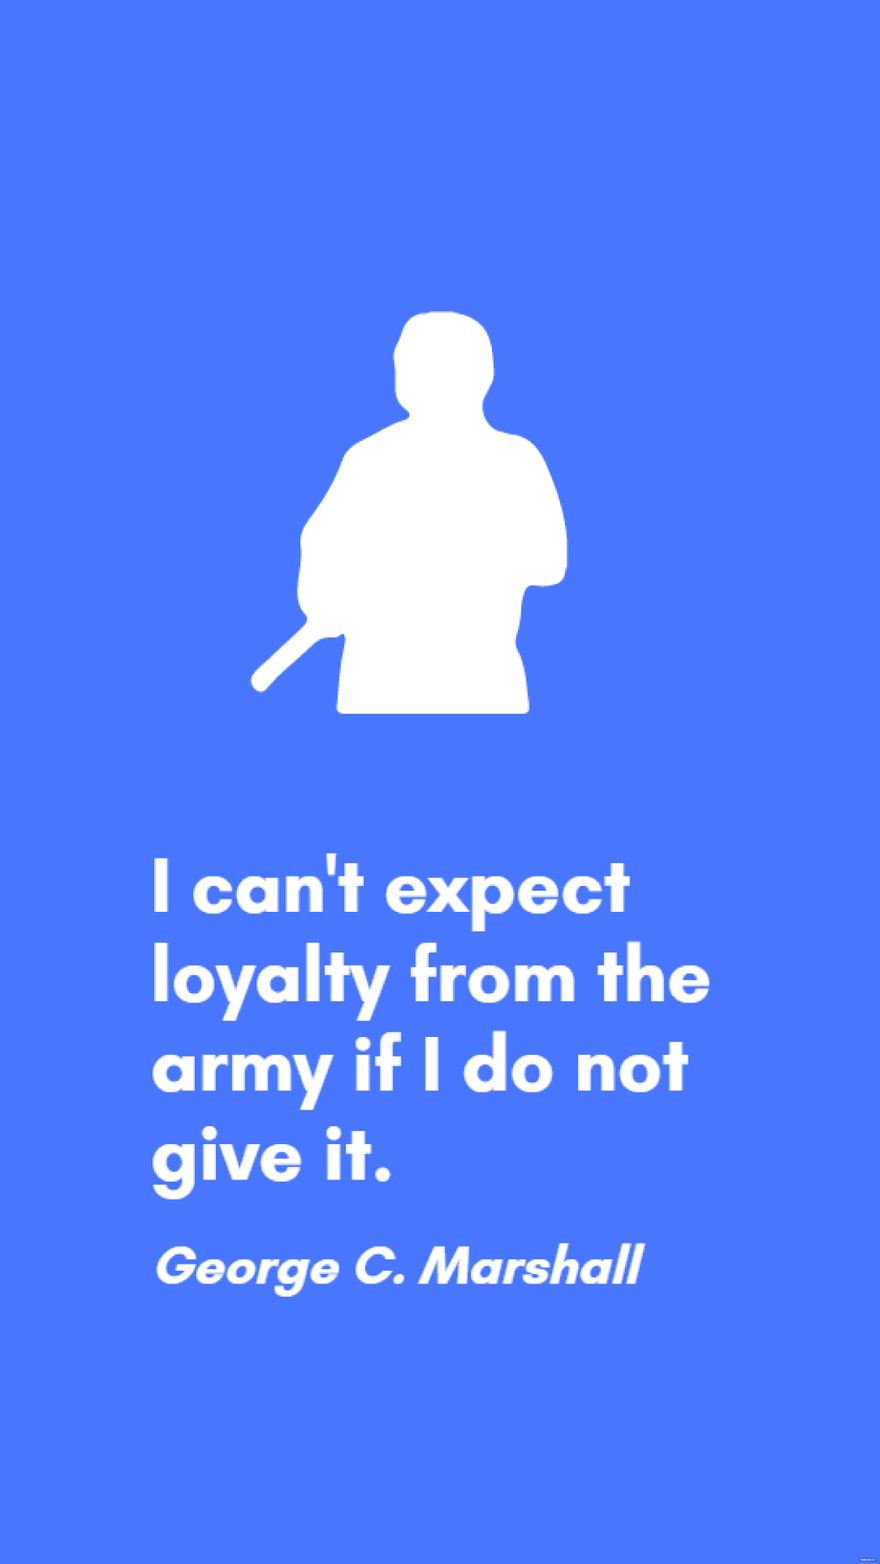 Free George C. Marshall - I can't expect loyalty from the army if I do not give it. in JPG